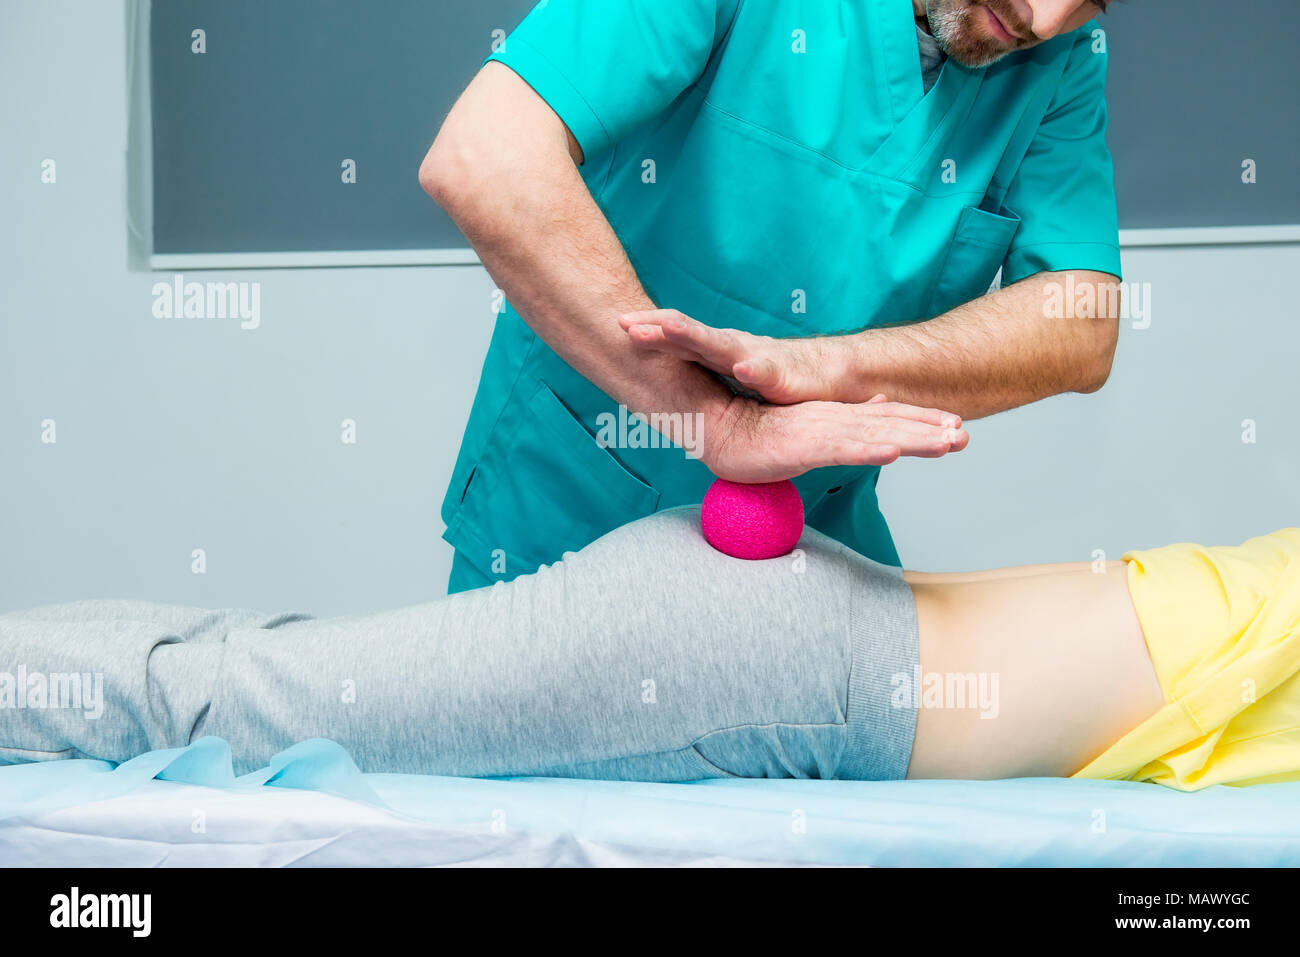 Woman at the physiotherapy receiving ball massage from therapist. A chiropractor treats patient's femur buttock in medical office. Neurology, Osteopat Stock Photo